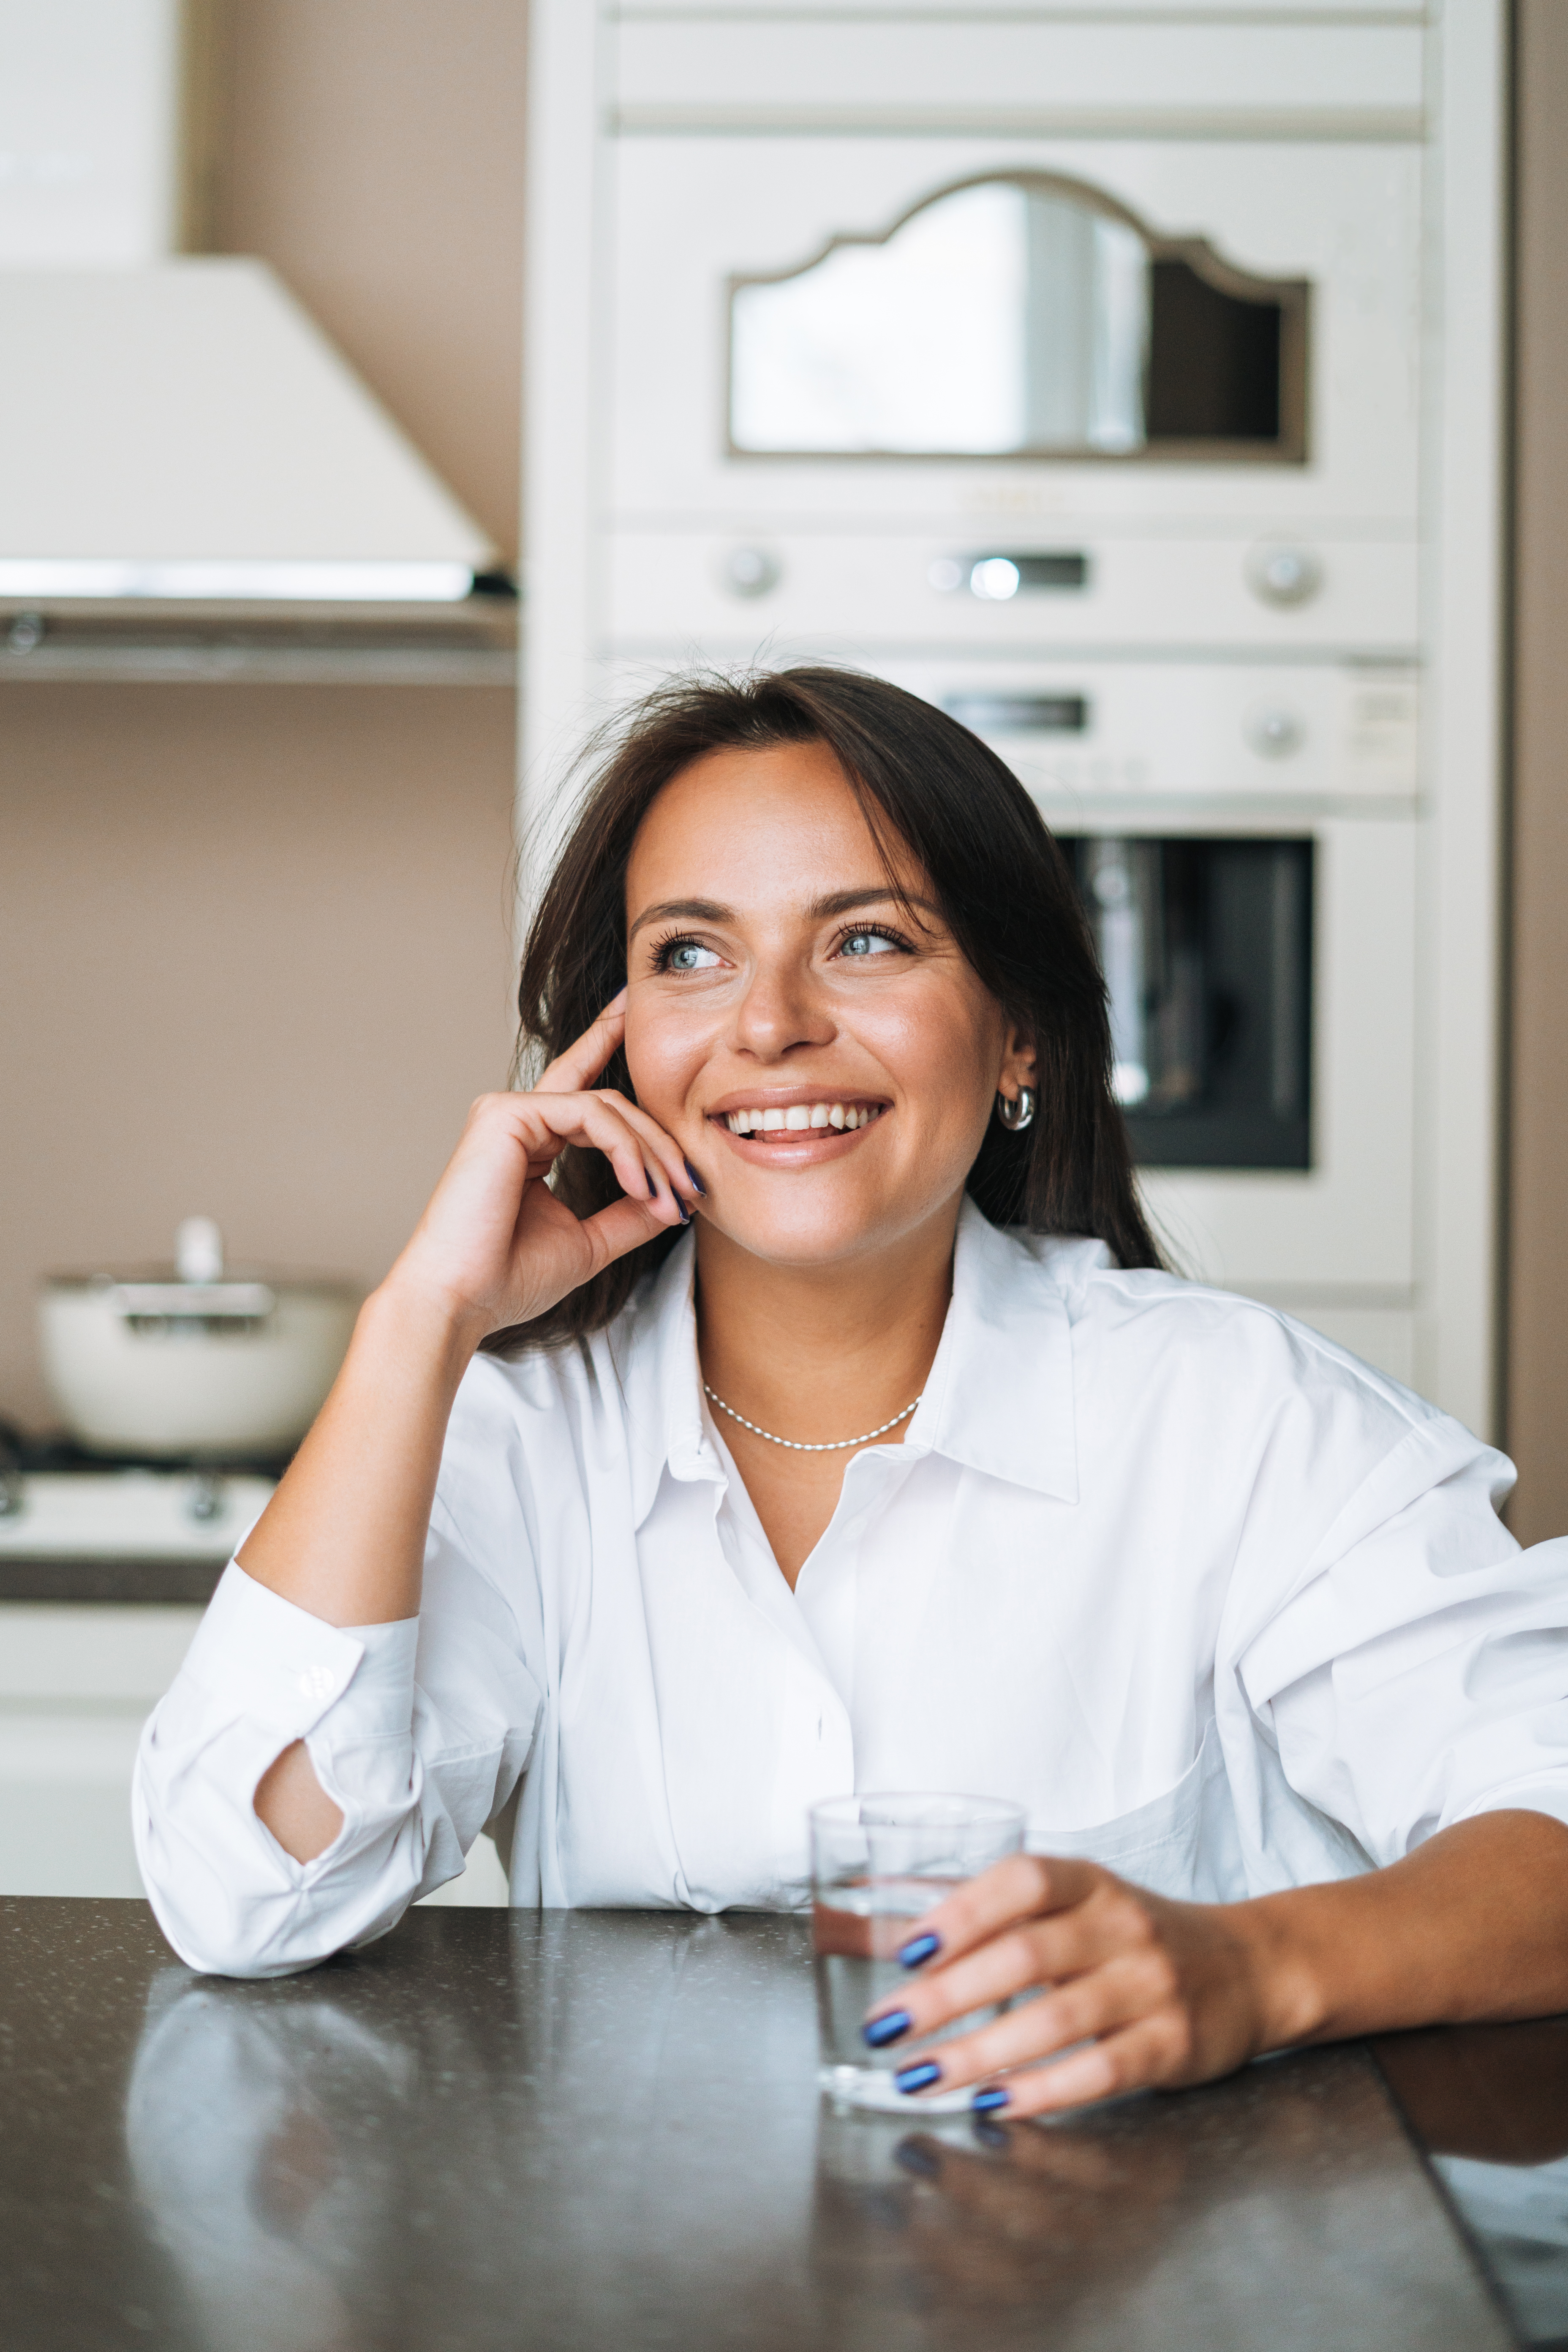 Close-up of a woman sitting at a kitchen table and smiling